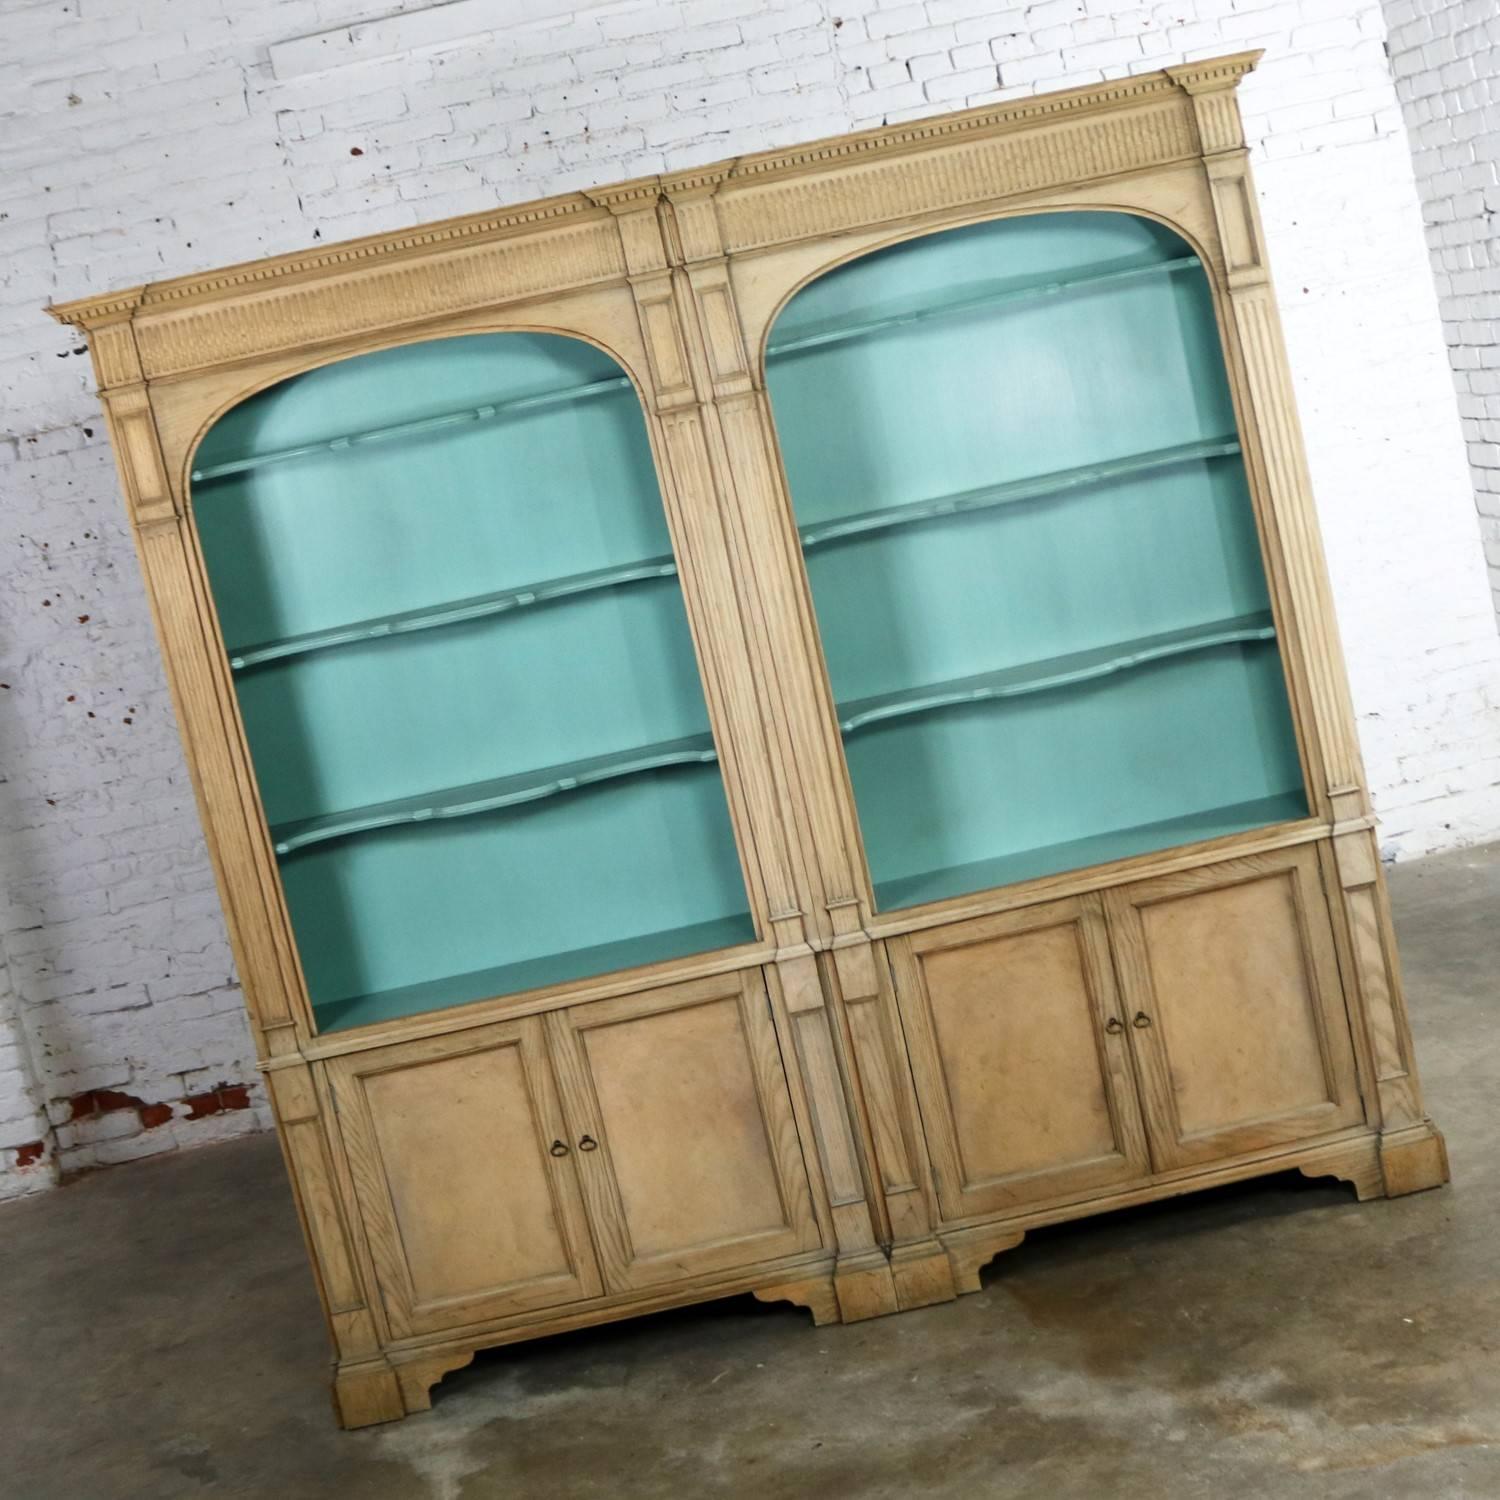 Handsome French style cerused open bookcases with turquoise interior and doored bottom cabinets by Baker Furniture. Two individual cabinets that are bolted together to form one piece. They are in fabulous vintage condition with normal wear and no